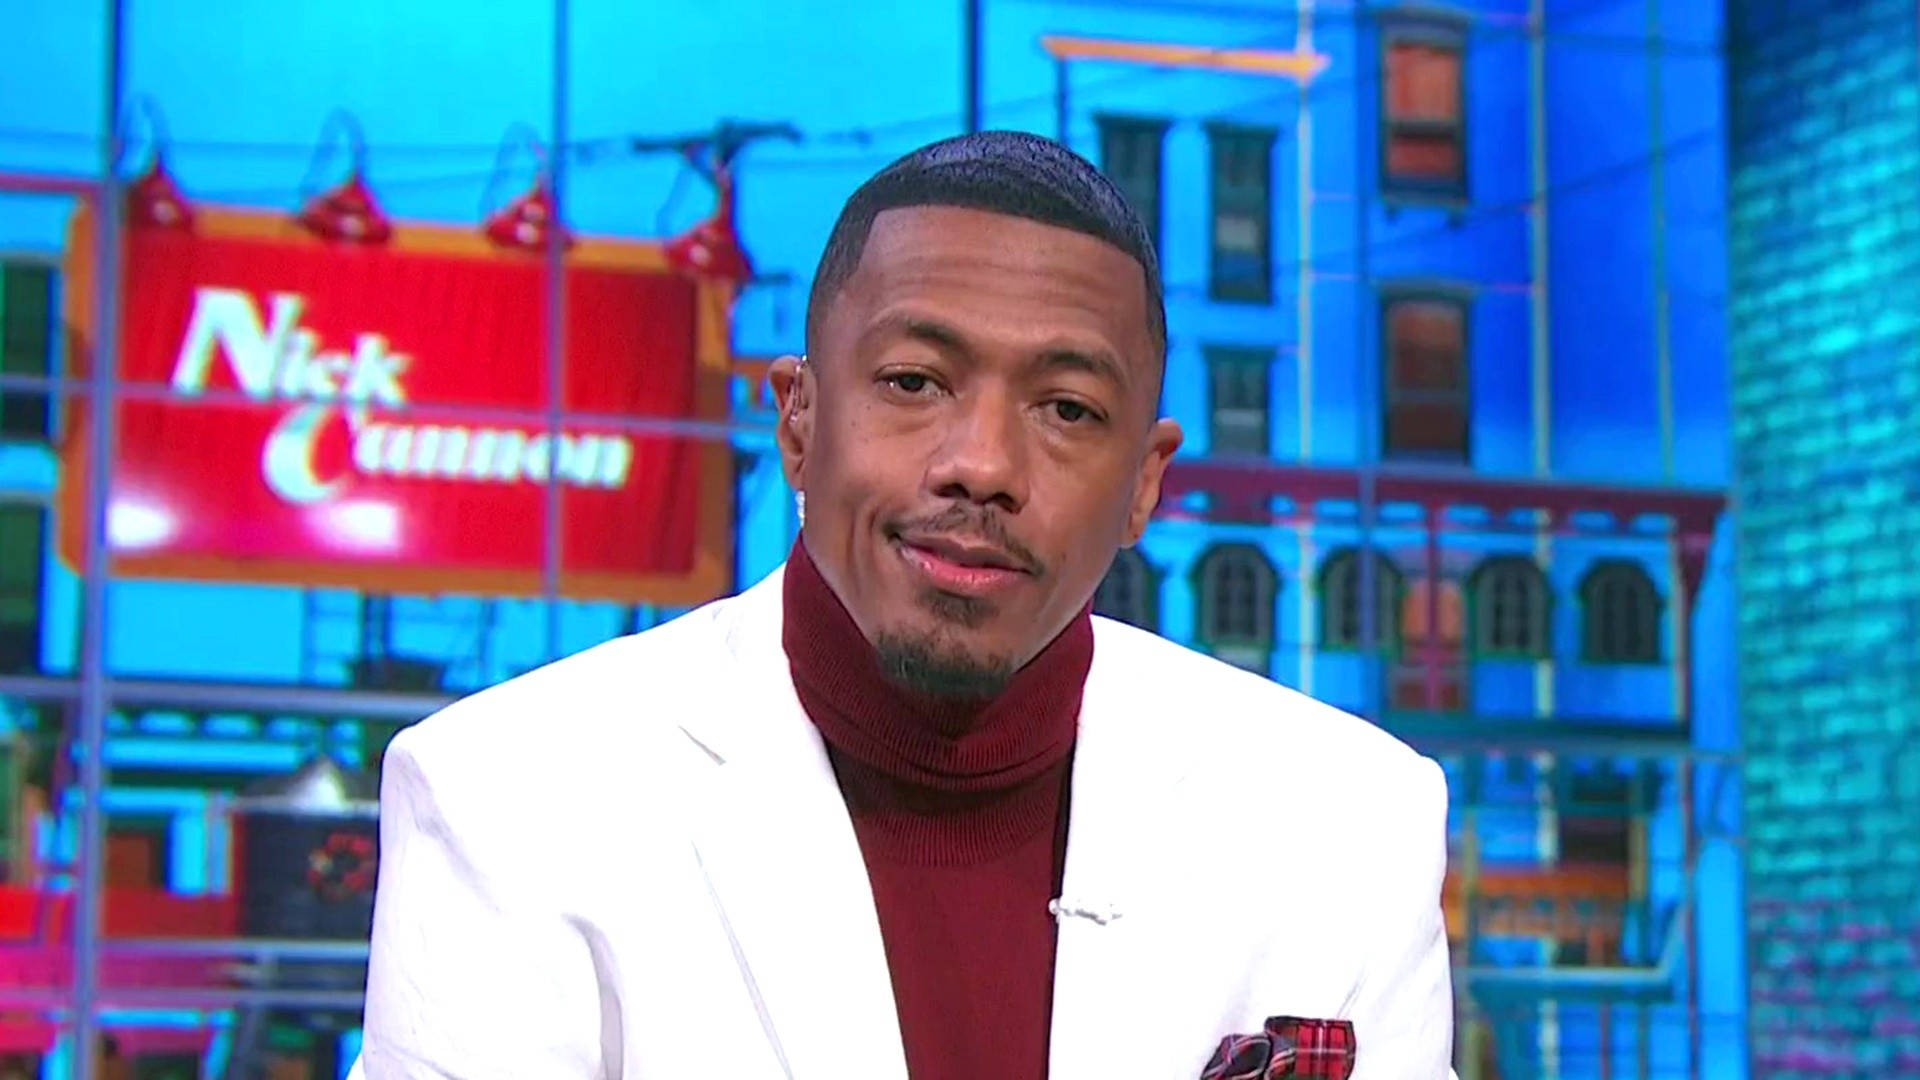 Nick Cannon With Turtleneck